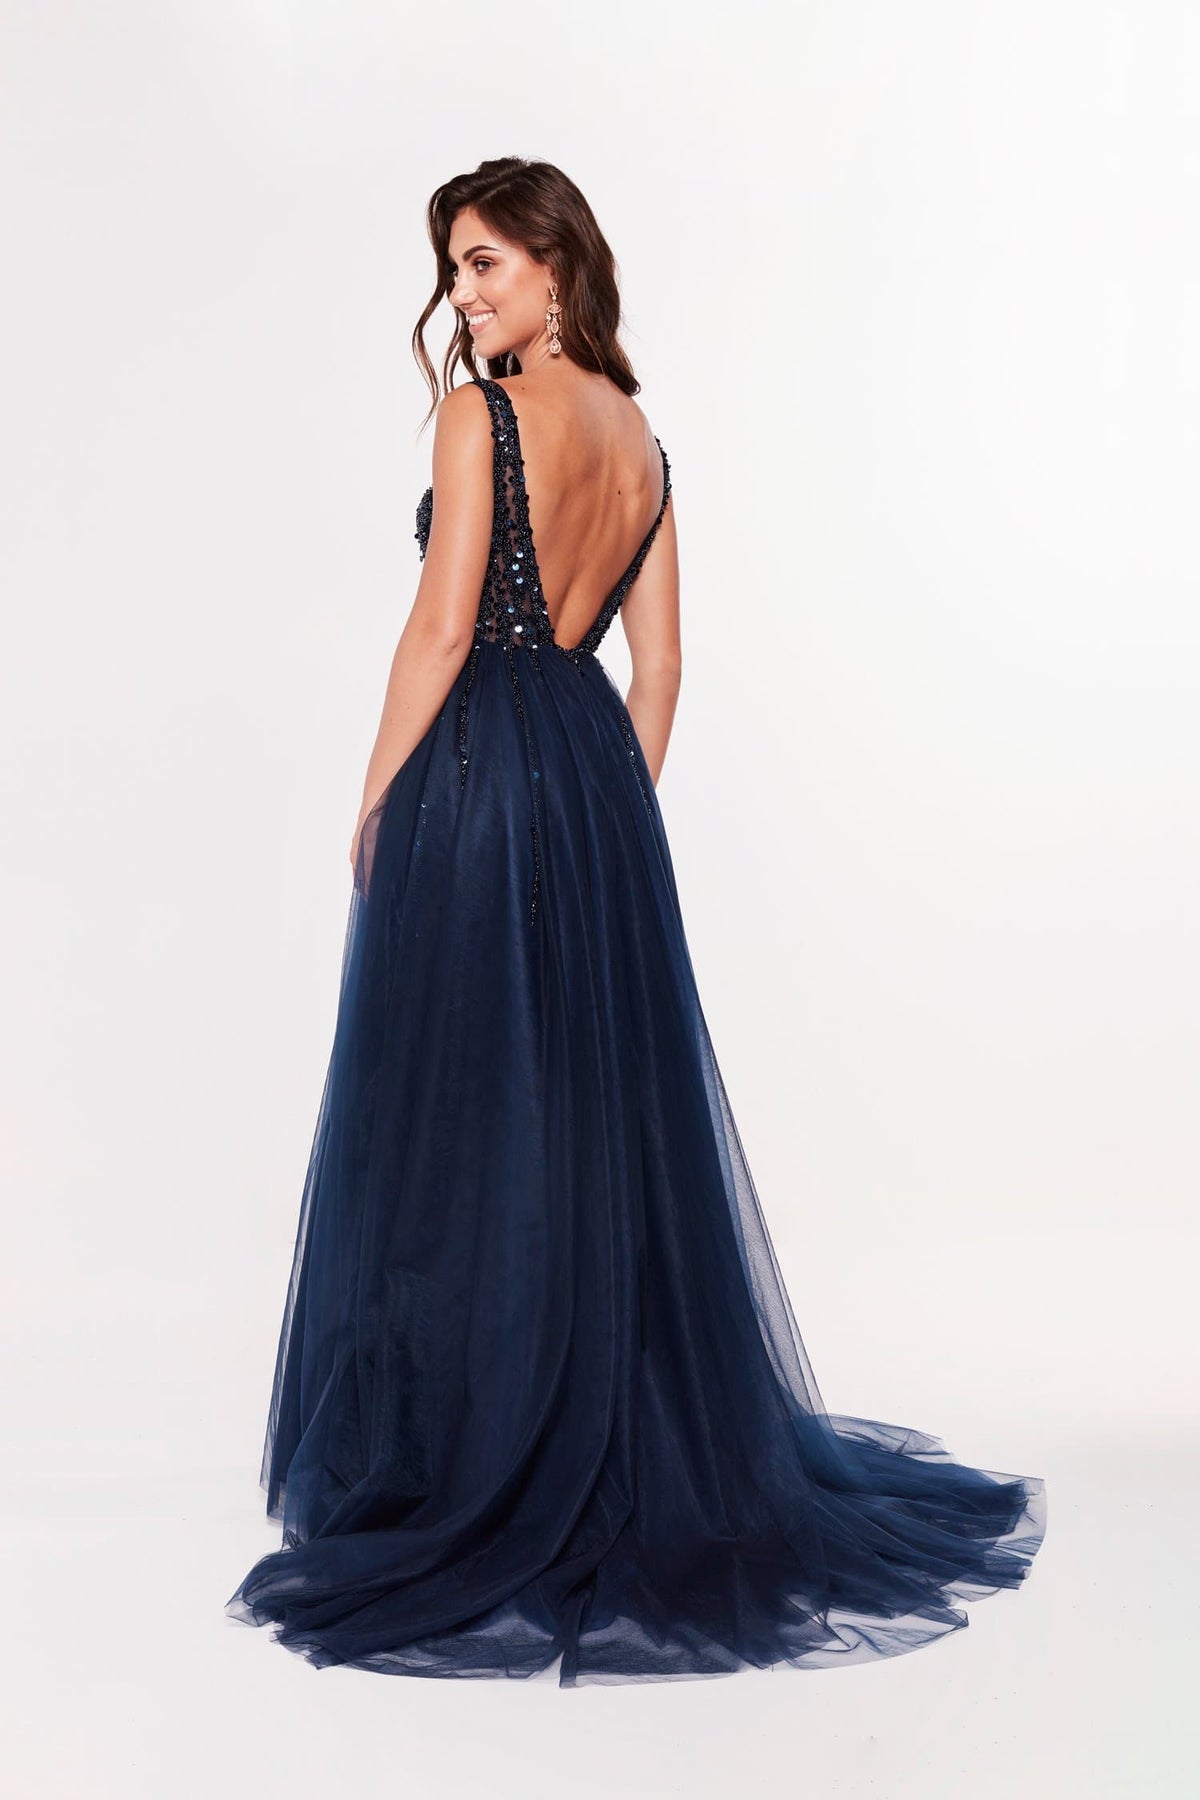 A&N Princessa - Navy Tulle Gown with Beaded Bodice – A&N Luxe Label